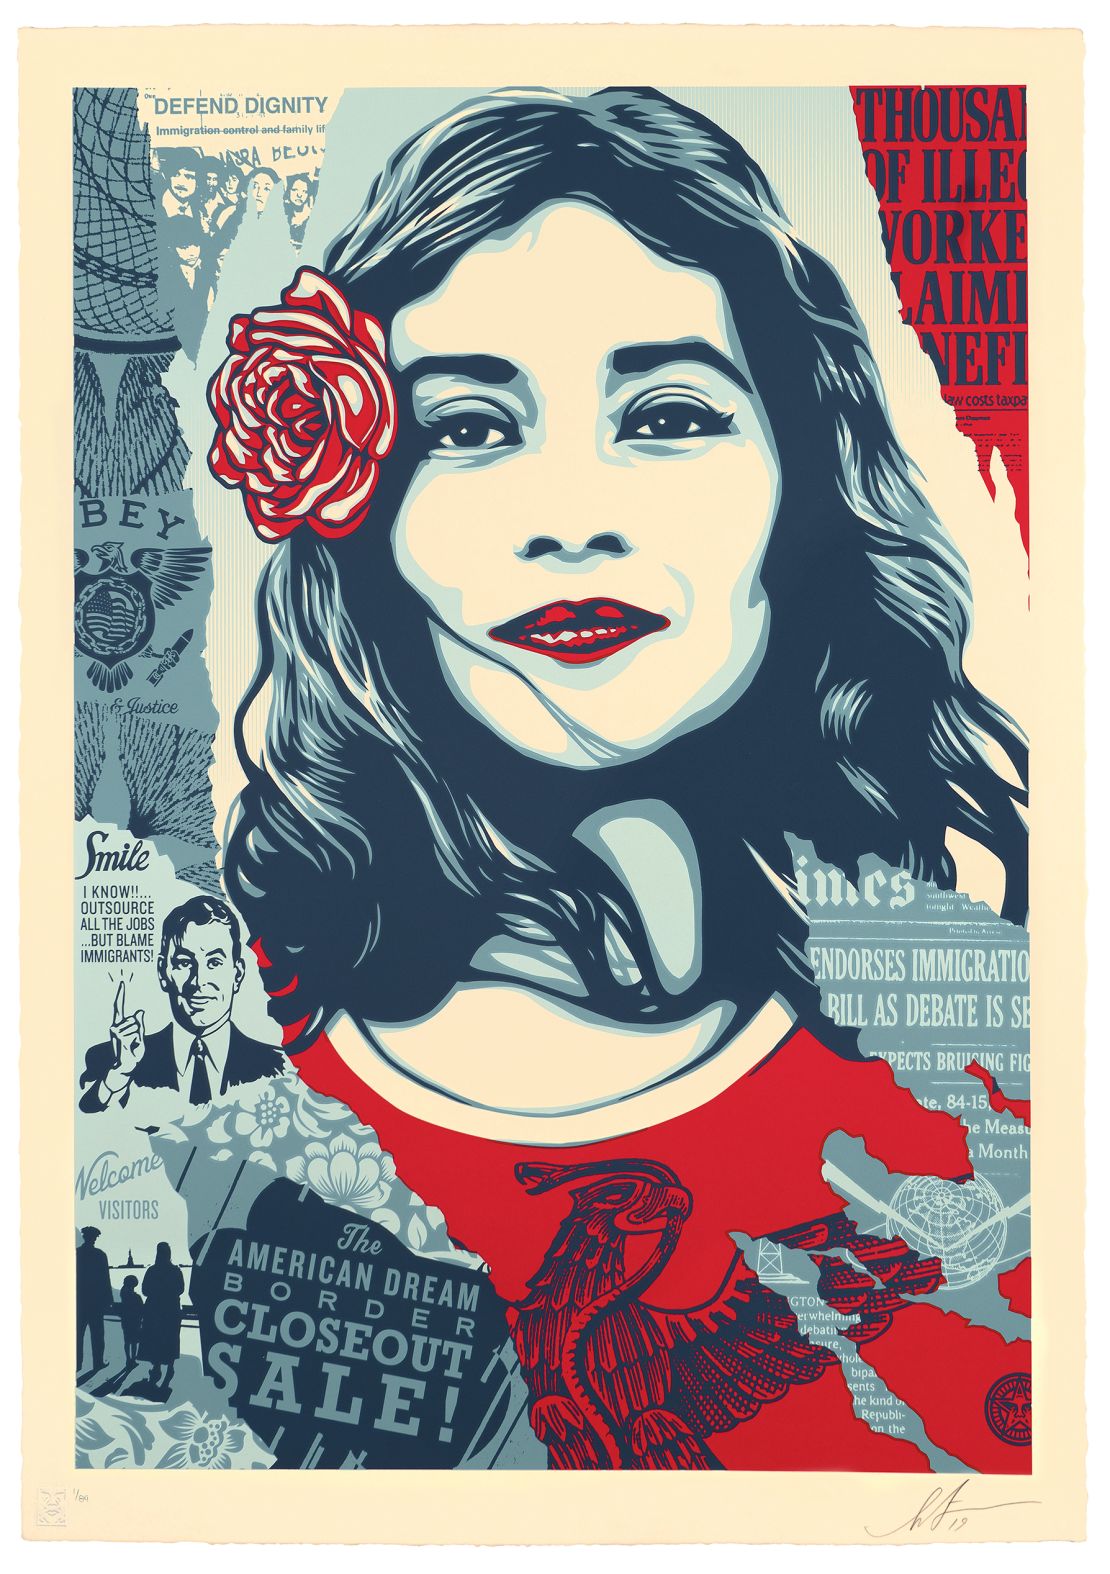 "Defend Dignity" by Shepard Fairey